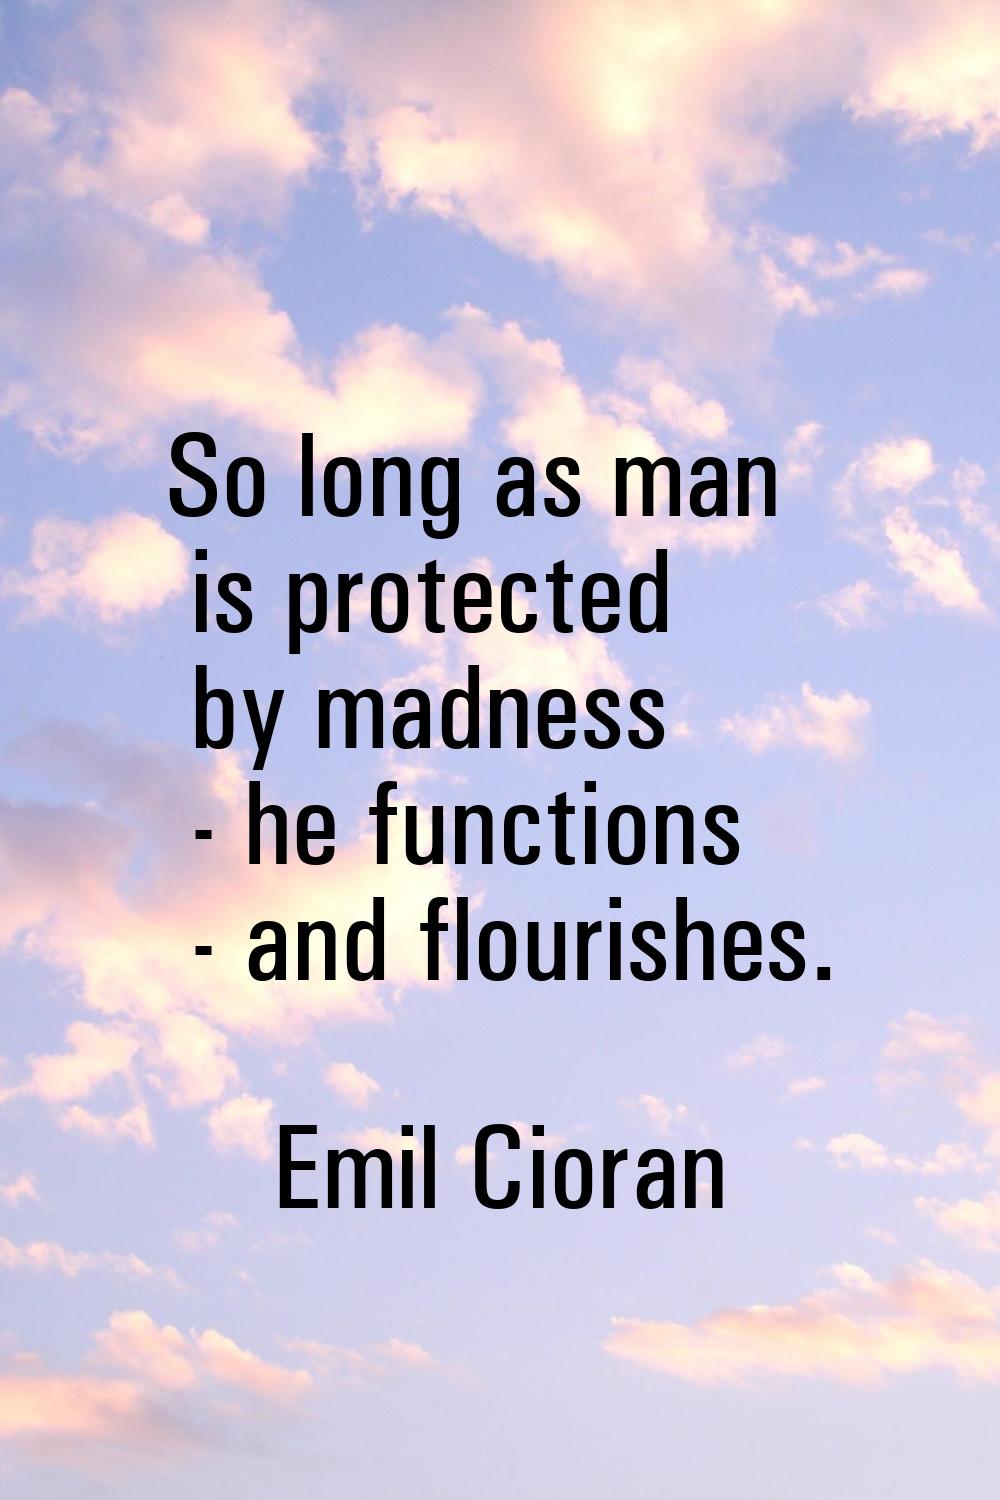 So long as man is protected by madness - he functions - and flourishes.